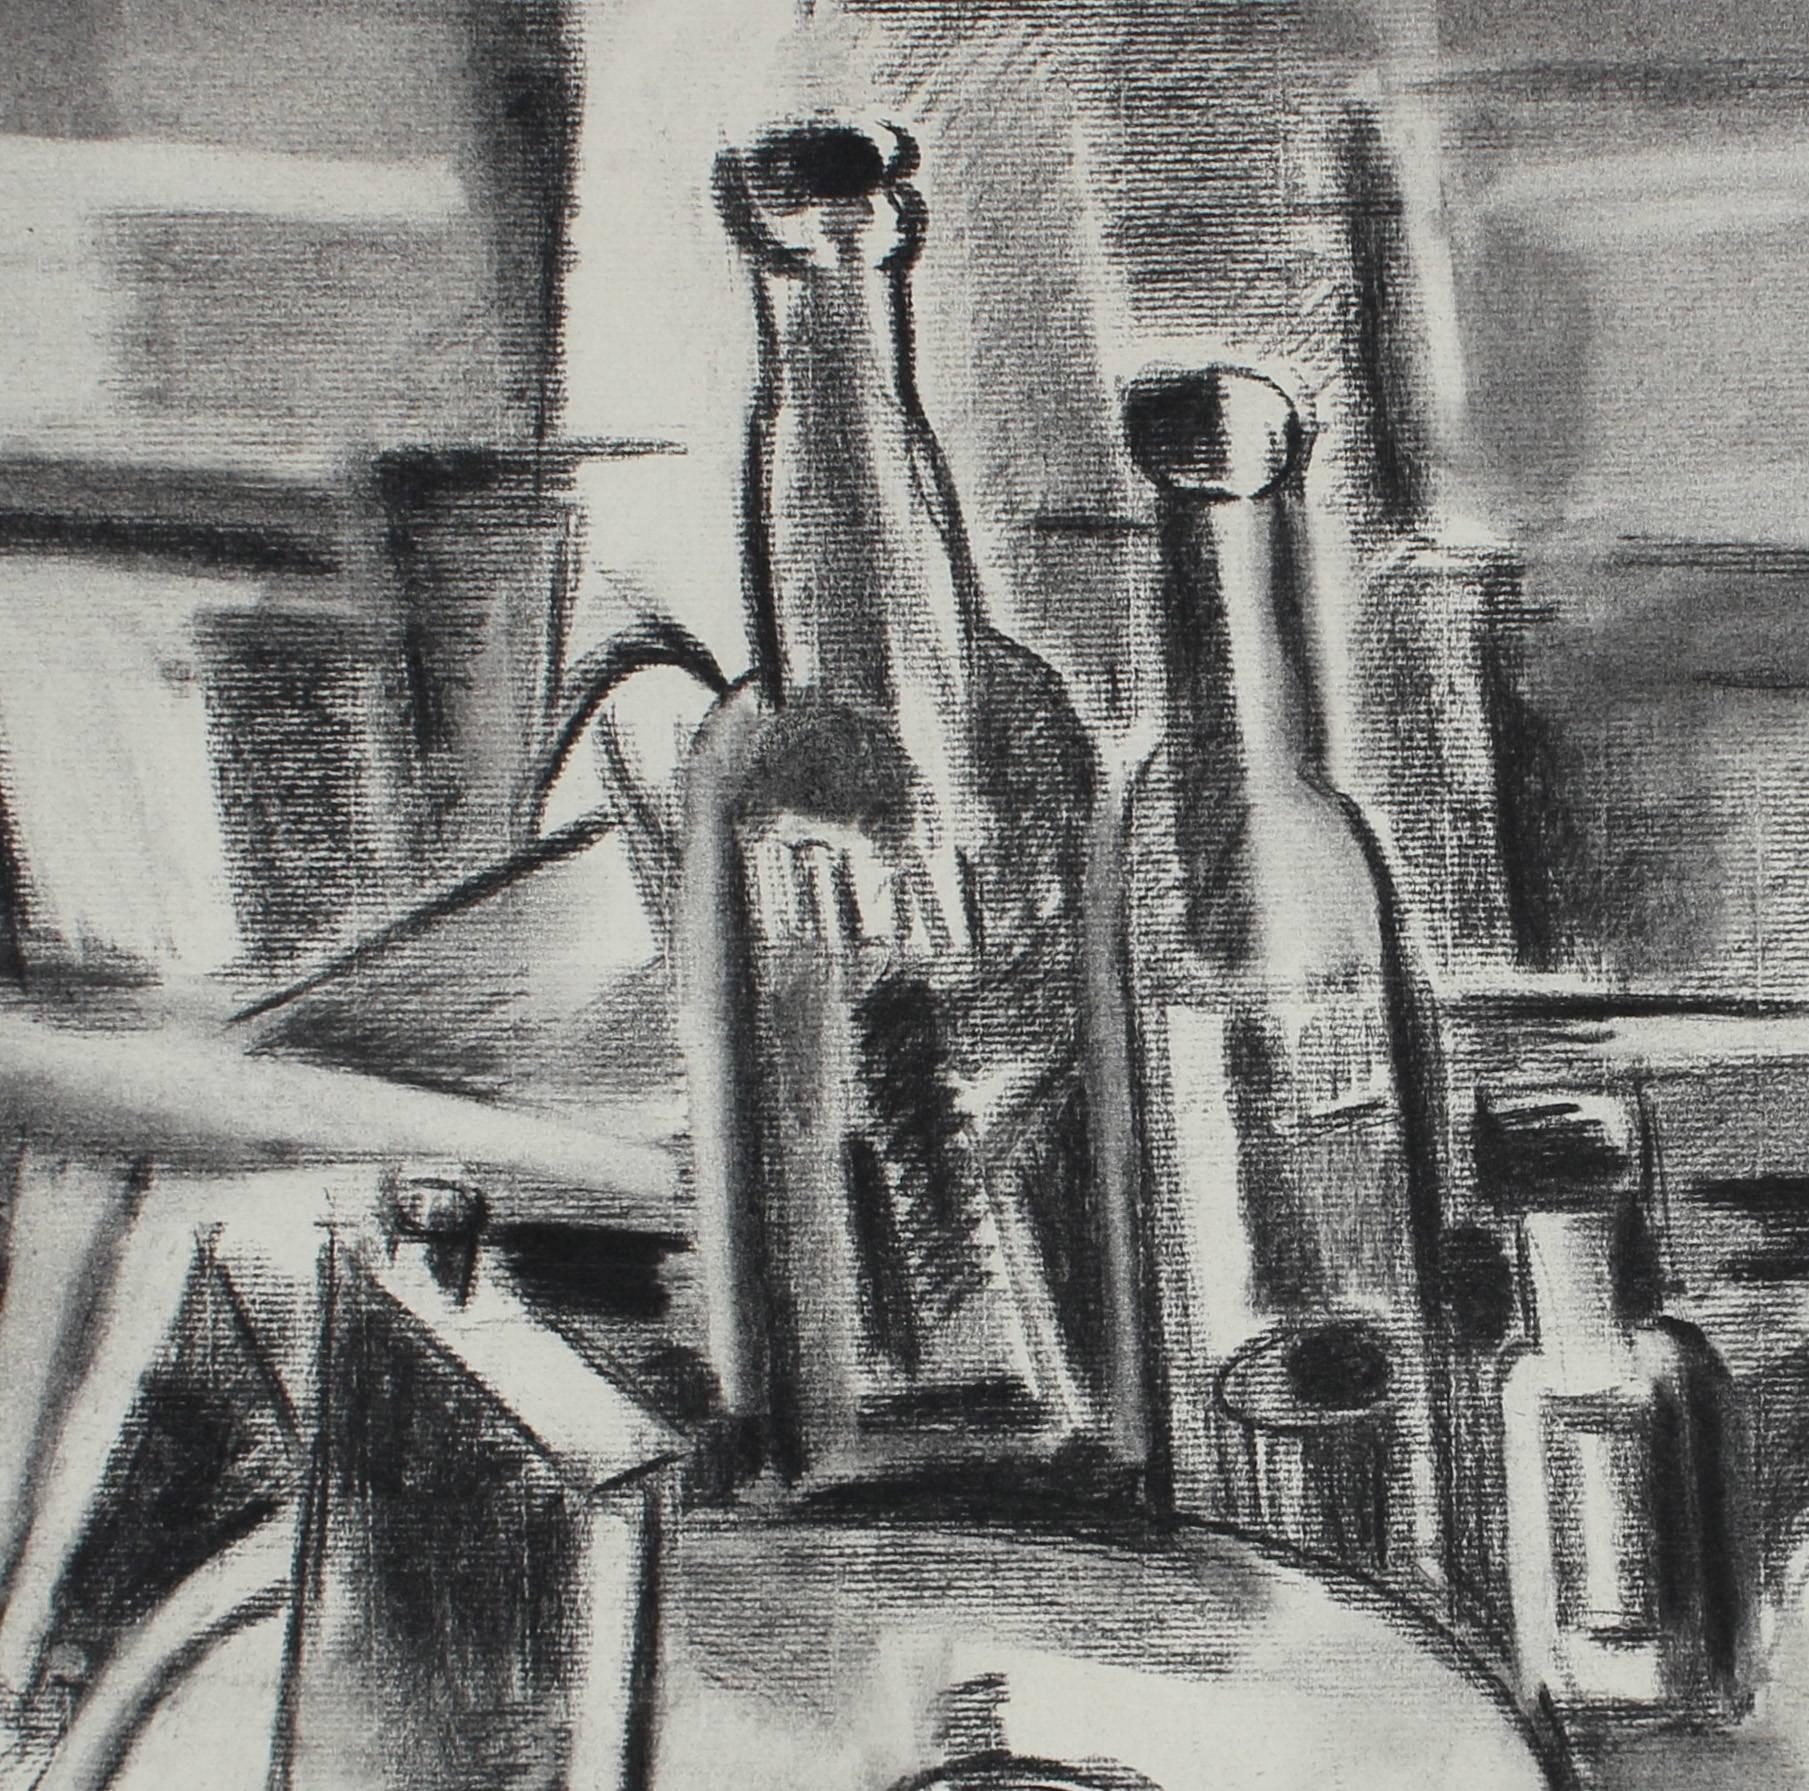 This 1949 charcoal on paper Paris still life is by Santa Fe artist, Seymour Tubis (1919-1993). Tubis studied at the Art Students League with Hans Hofmann (1946-1949). He exhibited in Paris in 1950 and won praise from Georges Braque. He was also